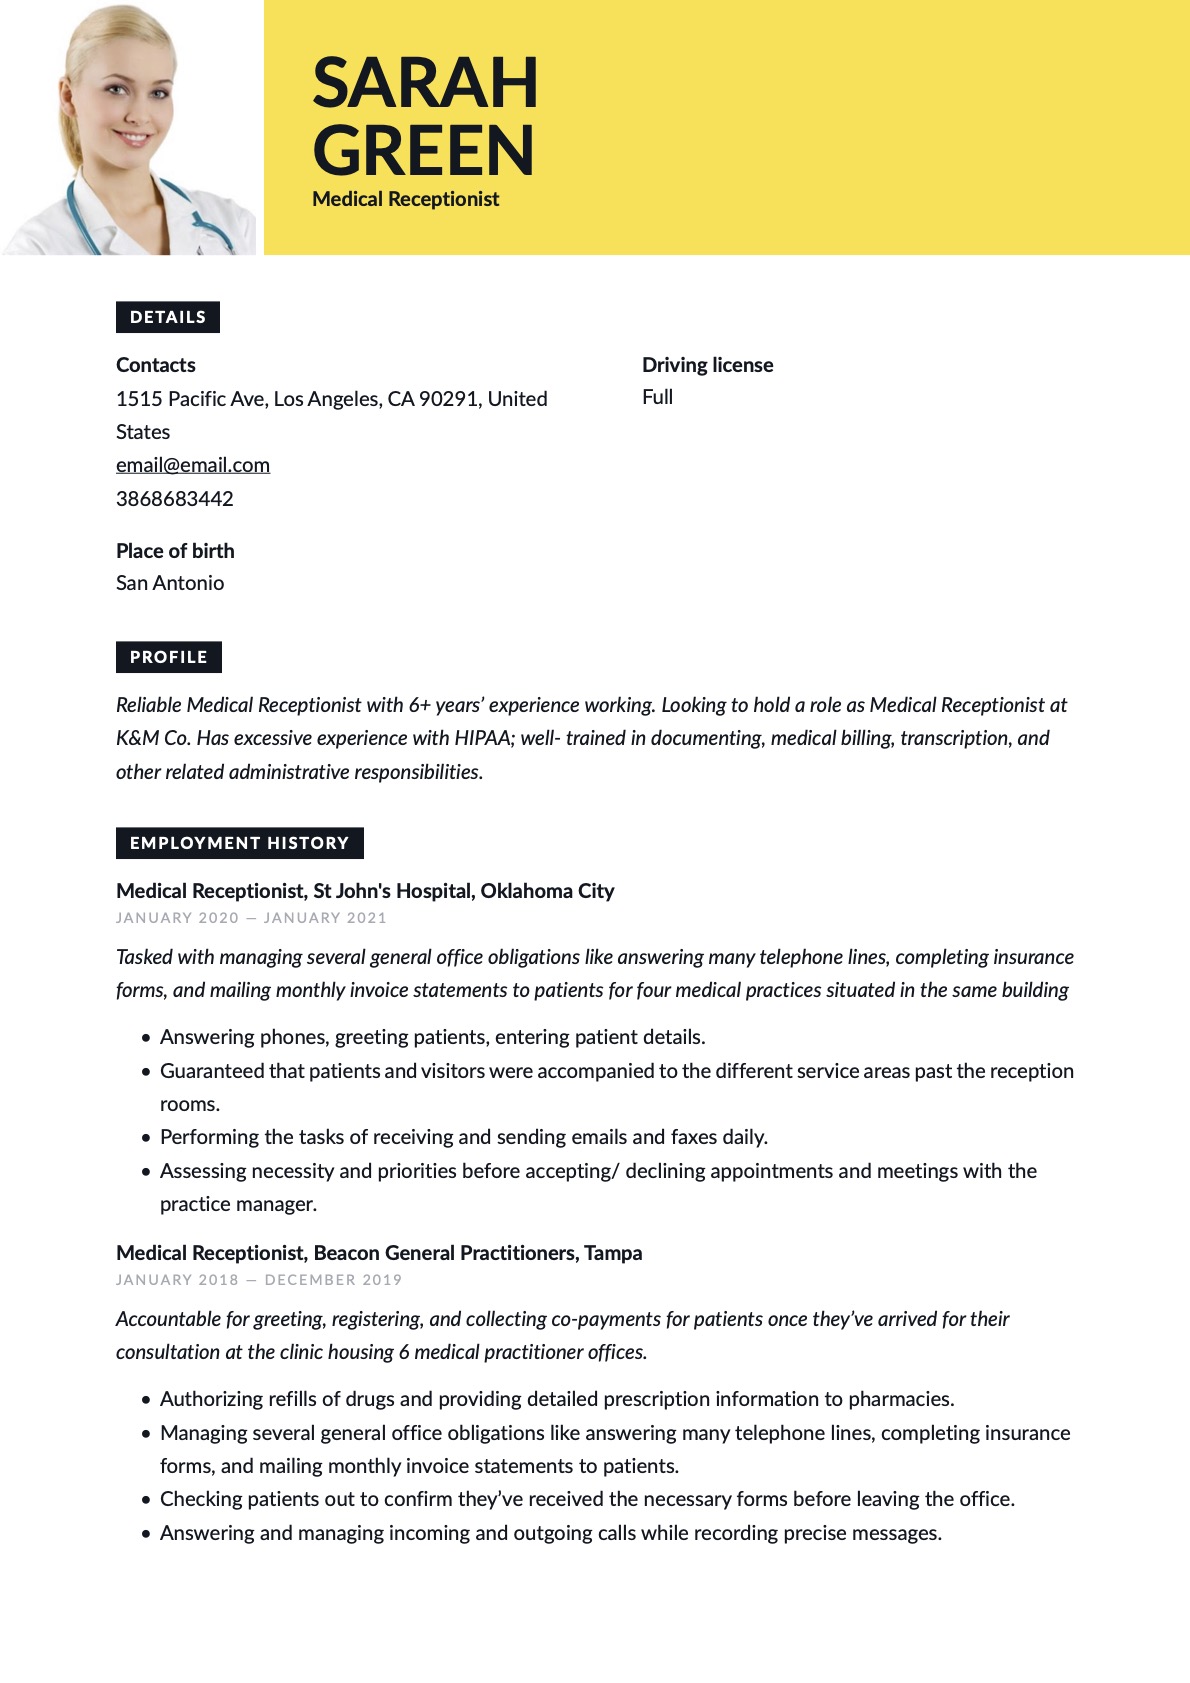 Example Resume Medical Receptionist-9